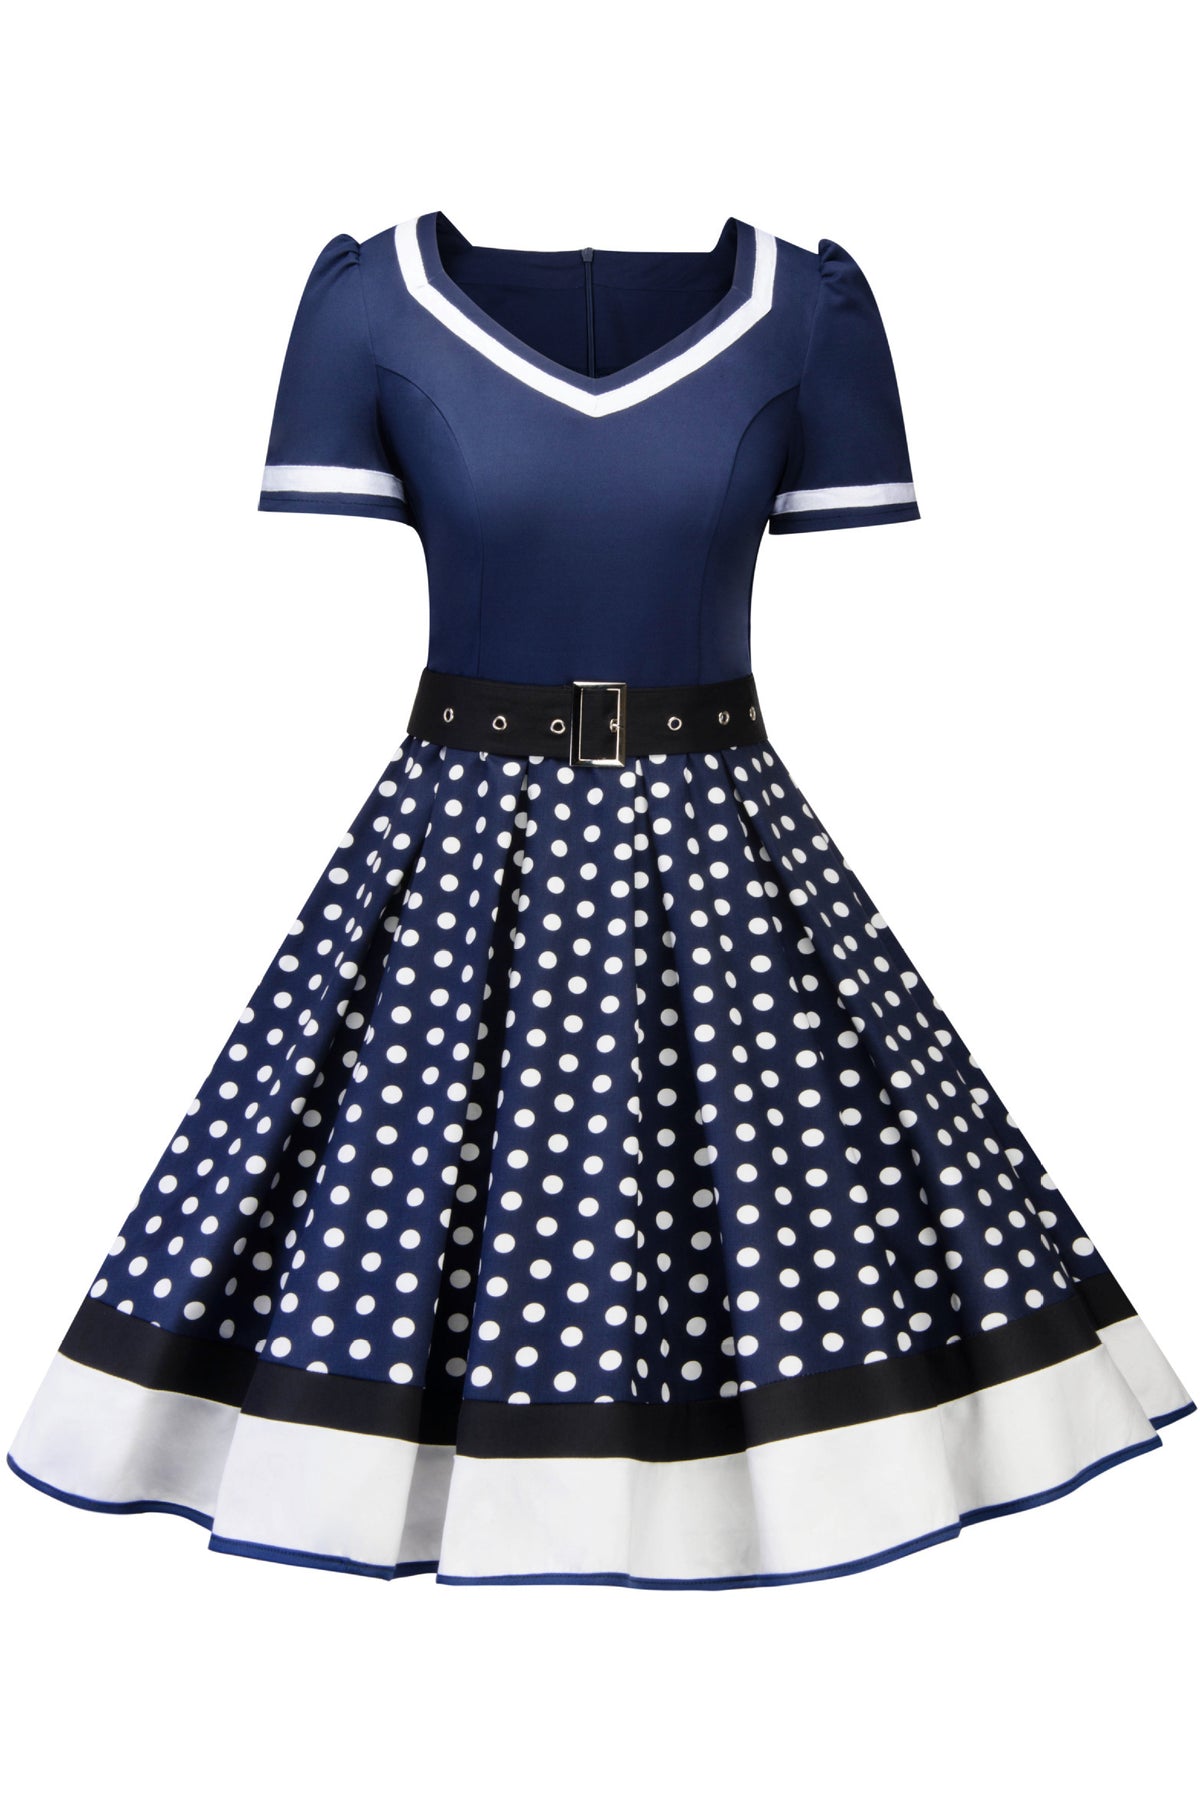 5 Styles Dotted A-line Vinatge Dress